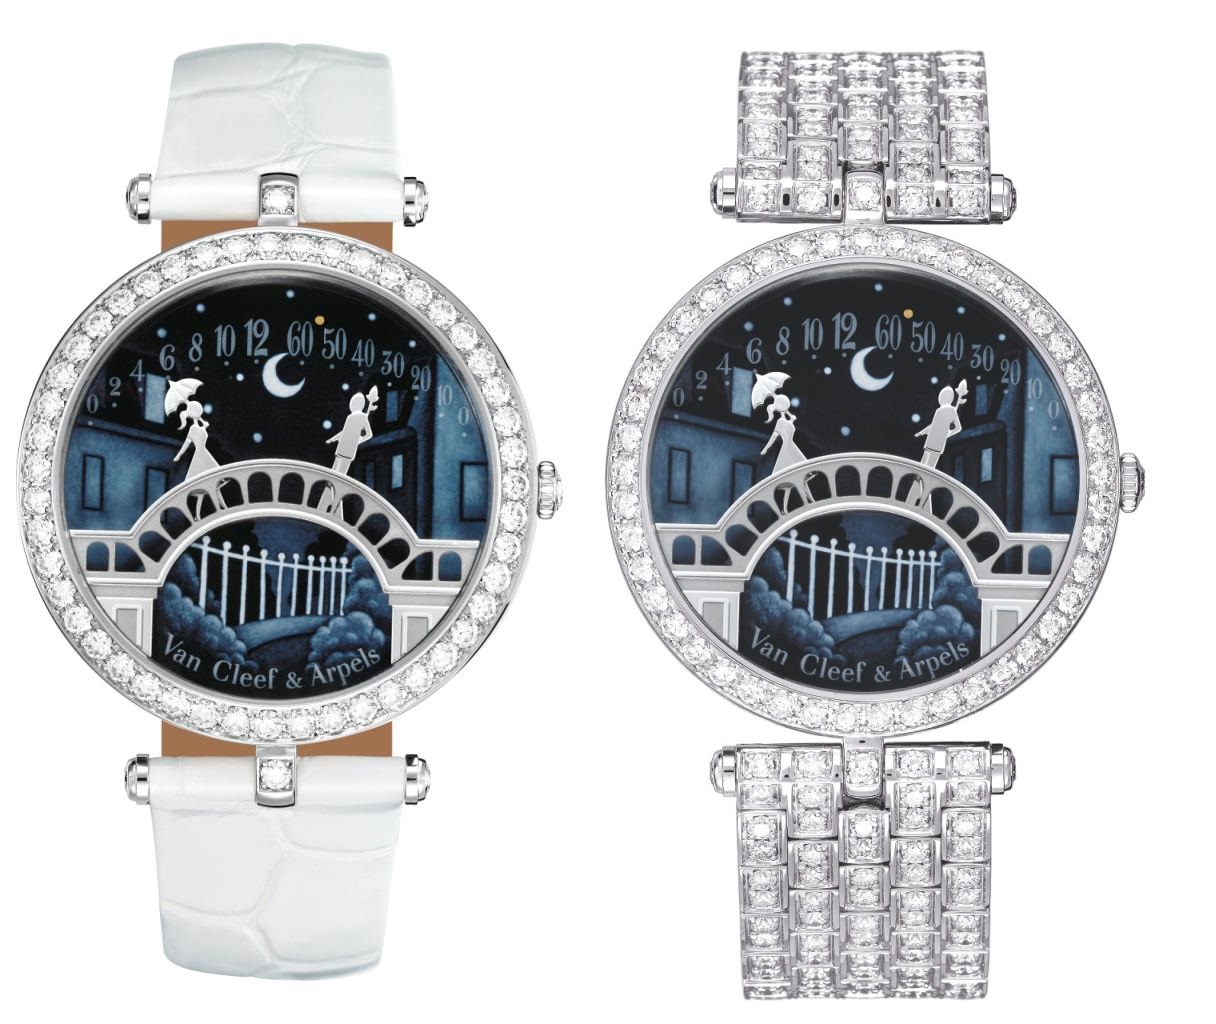 The Pont des Amoureux timepiece: the beginning of a love story